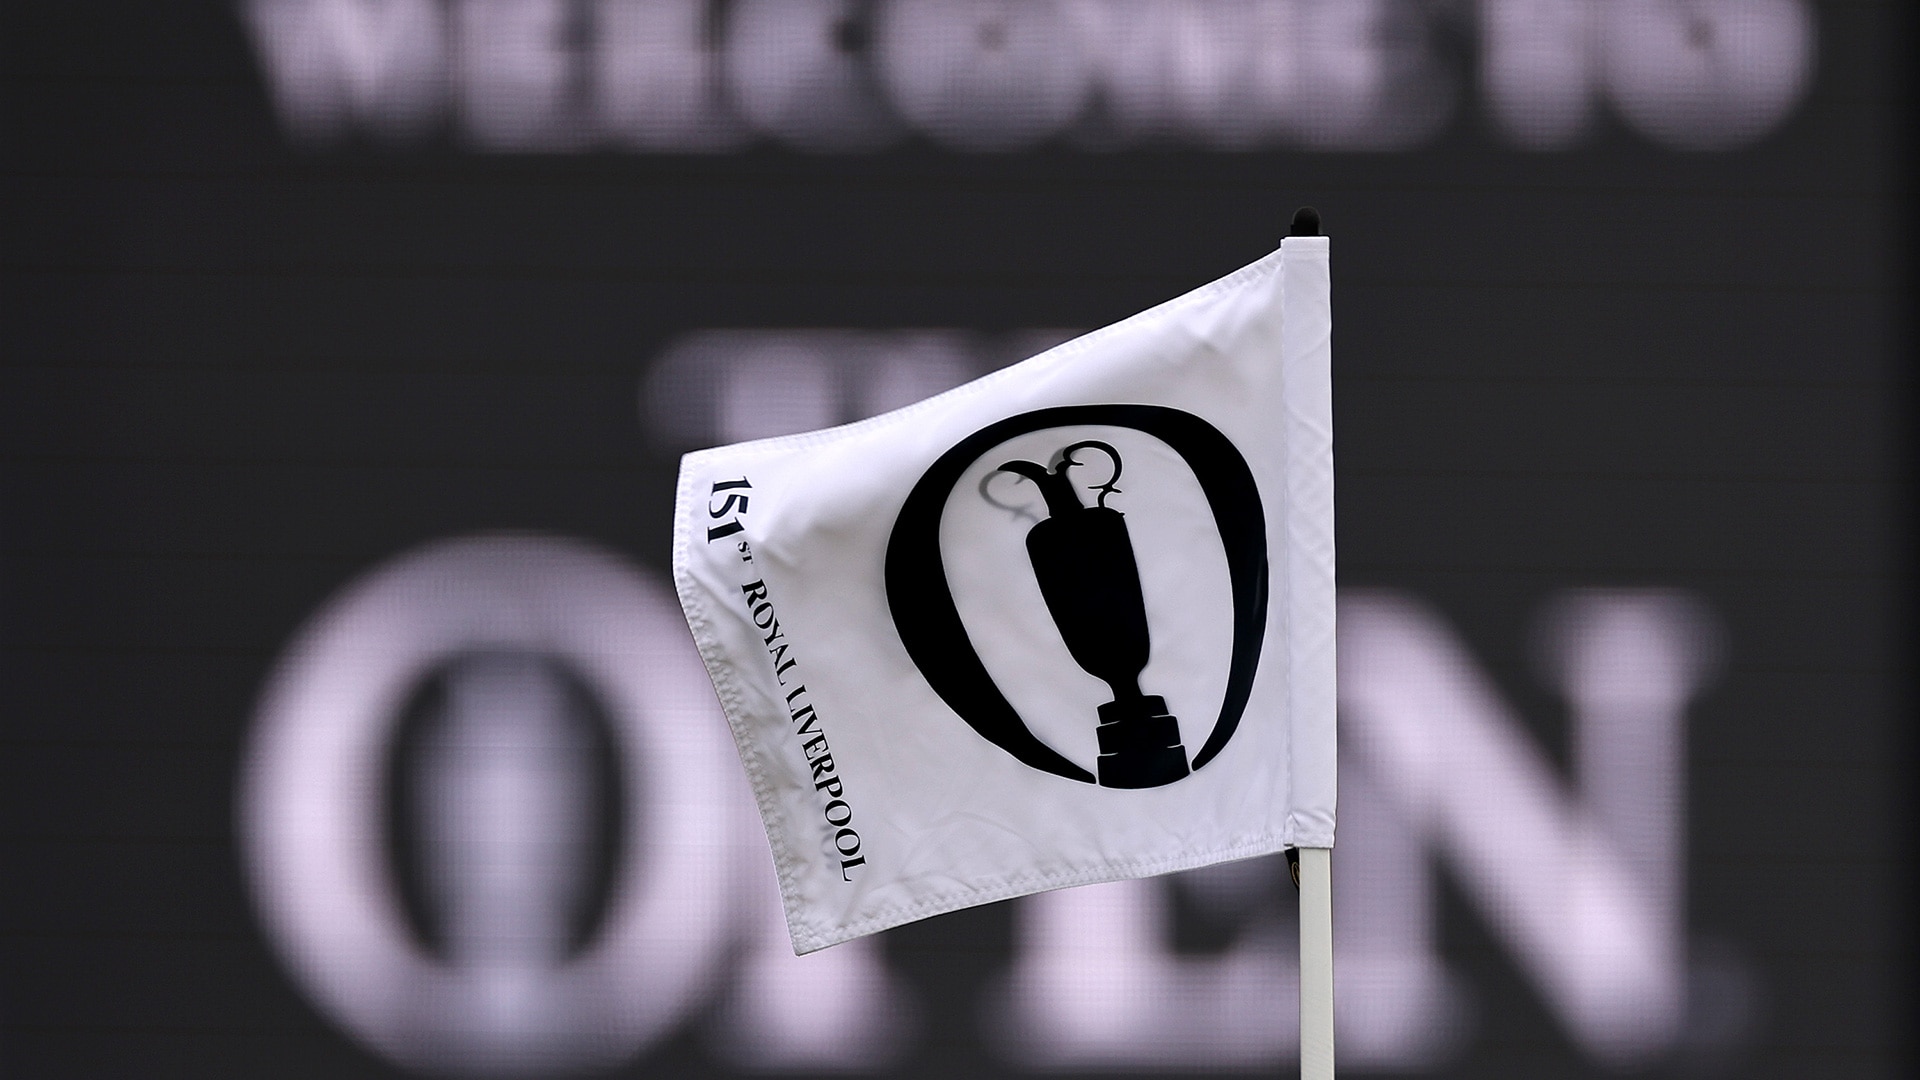 2023 British Open Tee times for Rounds 1 and 2 of The Open